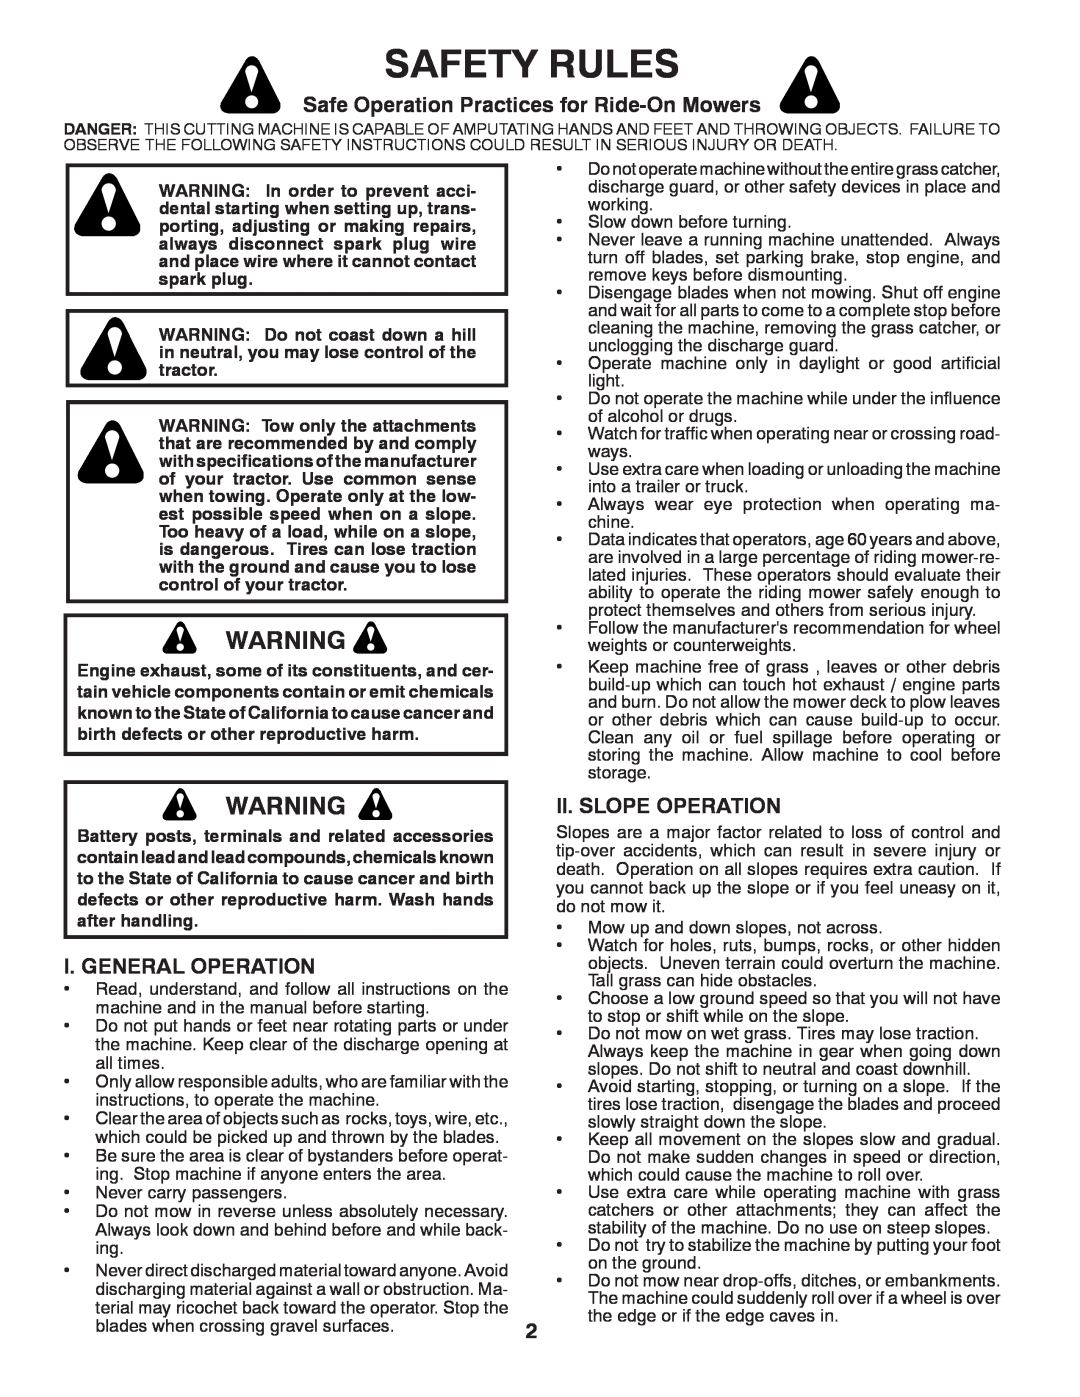 Poulan 413106 manual Safety Rules, Safe Operation Practices for Ride-OnMowers, I. General Operation, Ii. Slope Operation 